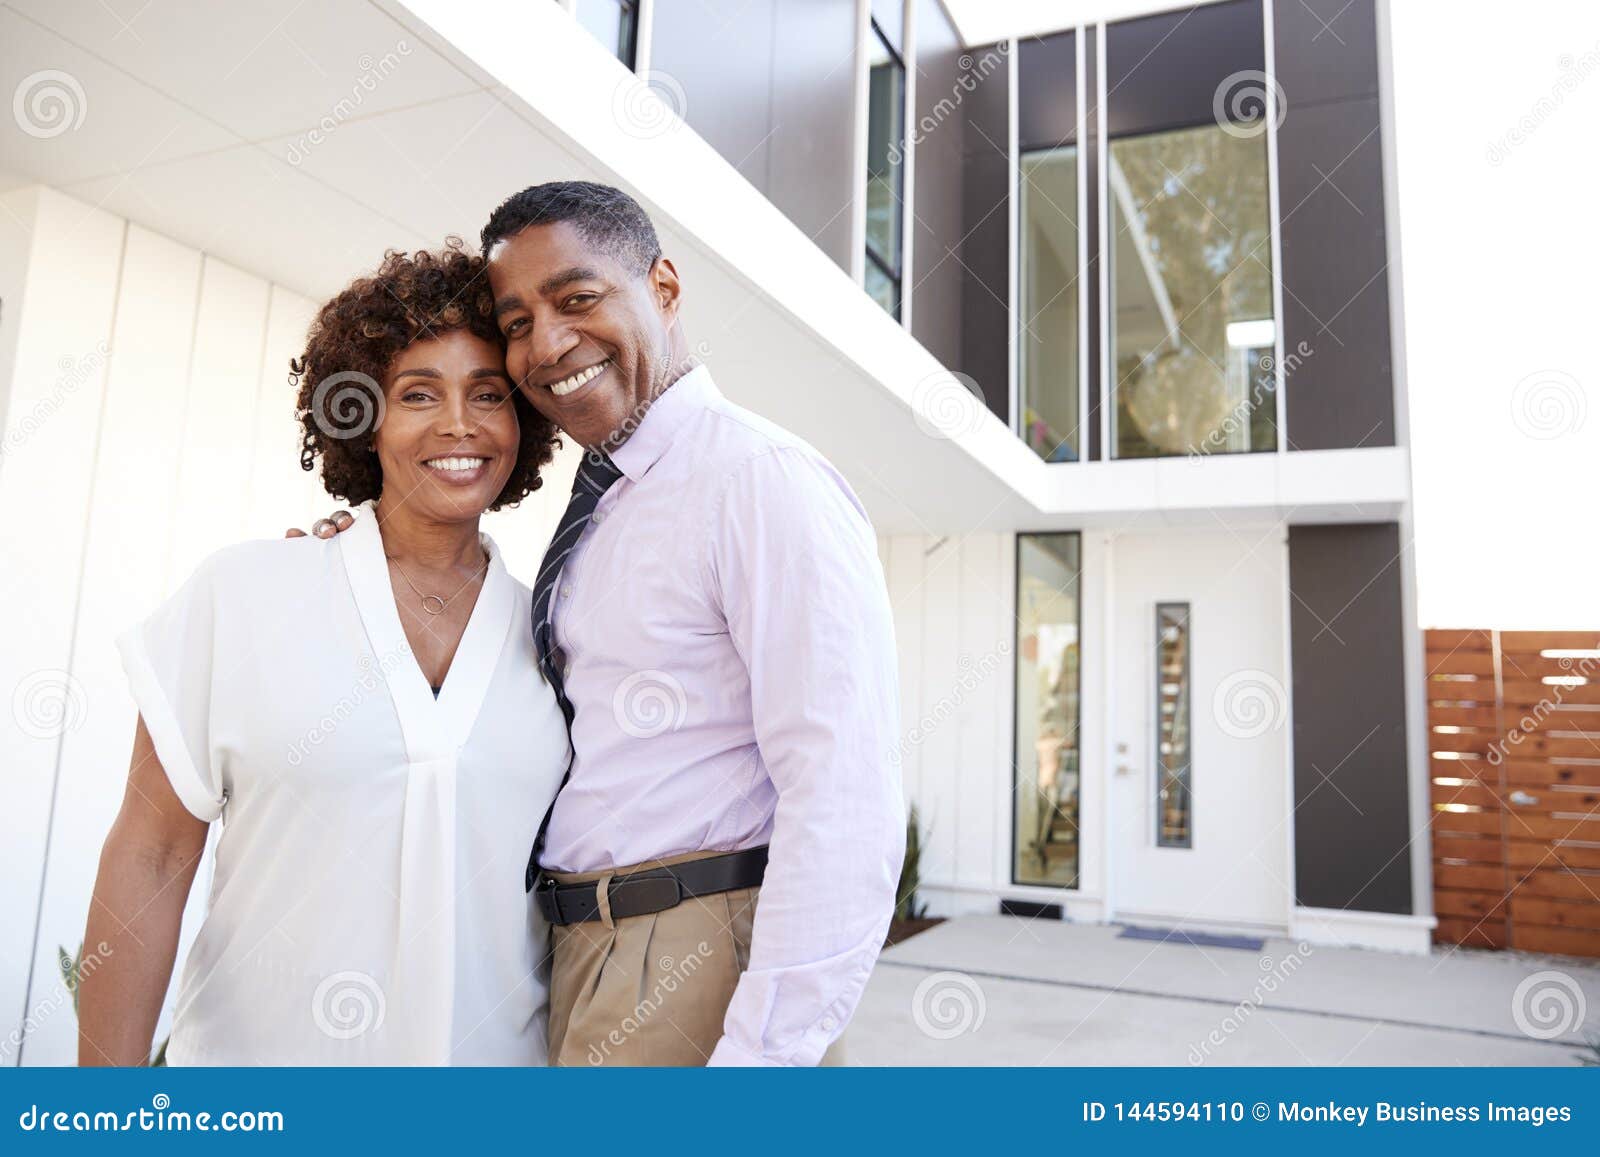 middle aged african american  couple stand outside admiring their modern home, back view